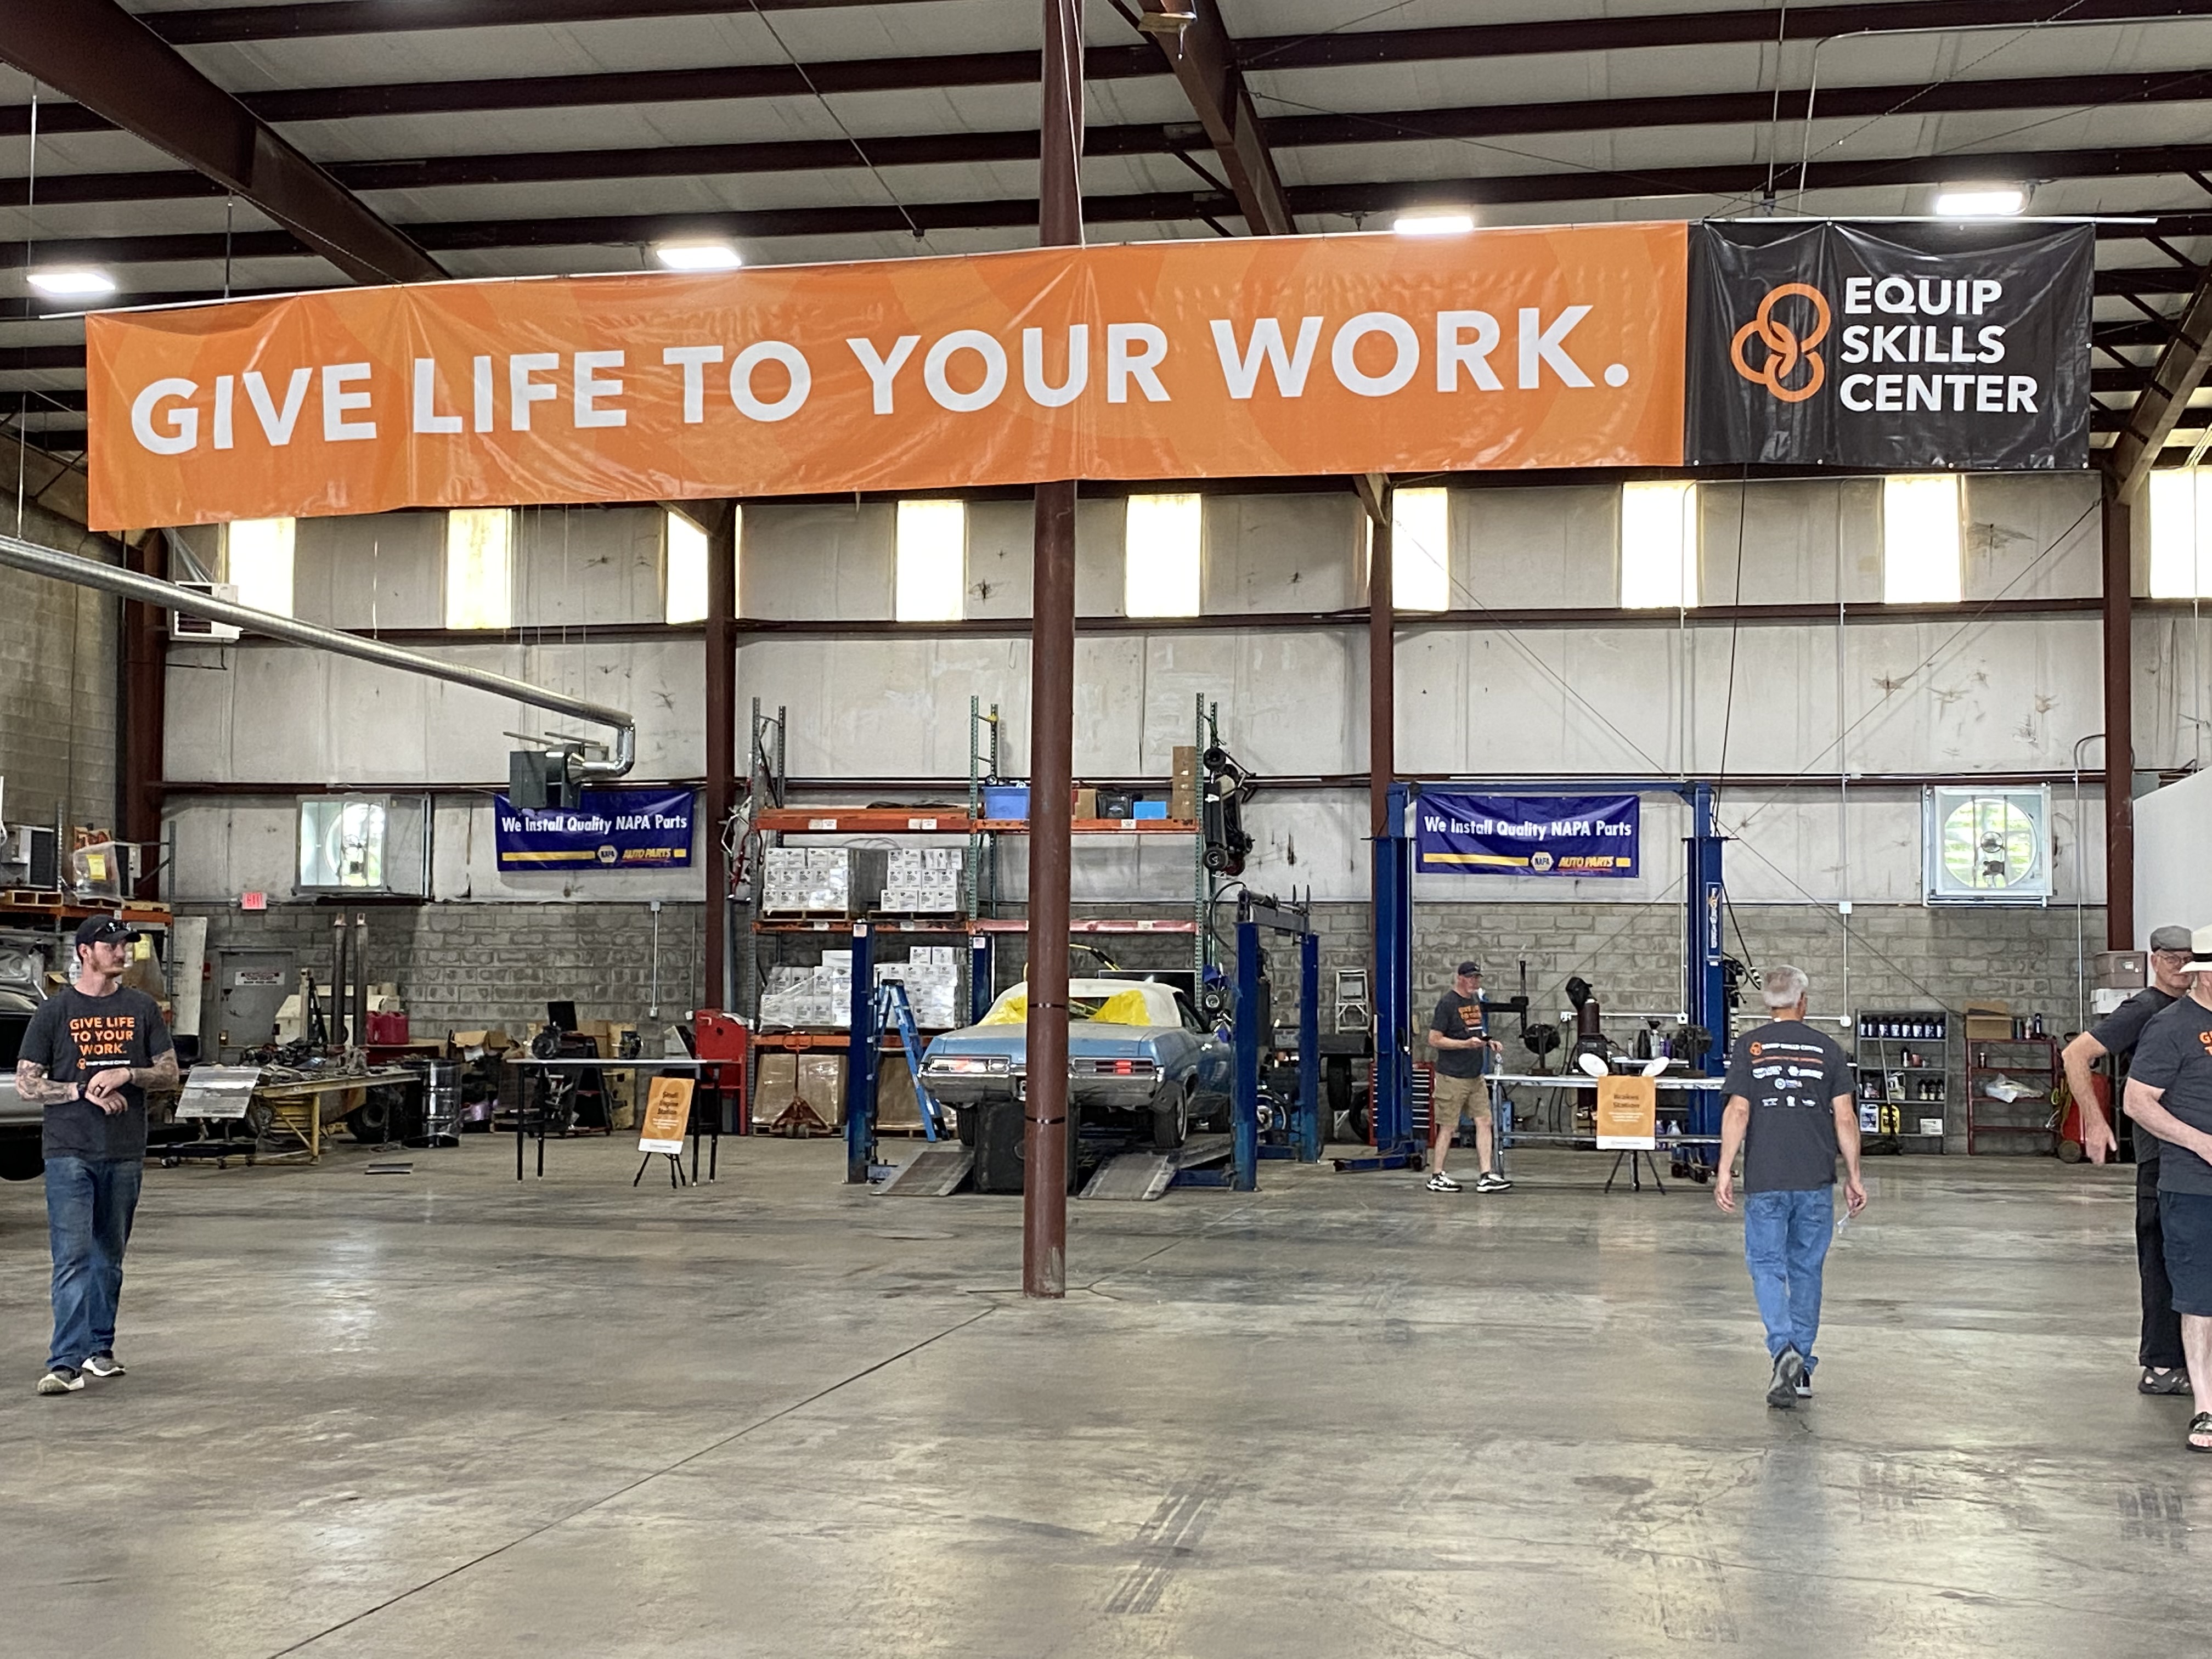 A photo of the Equip Skills Center garage. A few people are at work in the garage under a banner that reads "Give life to your work."